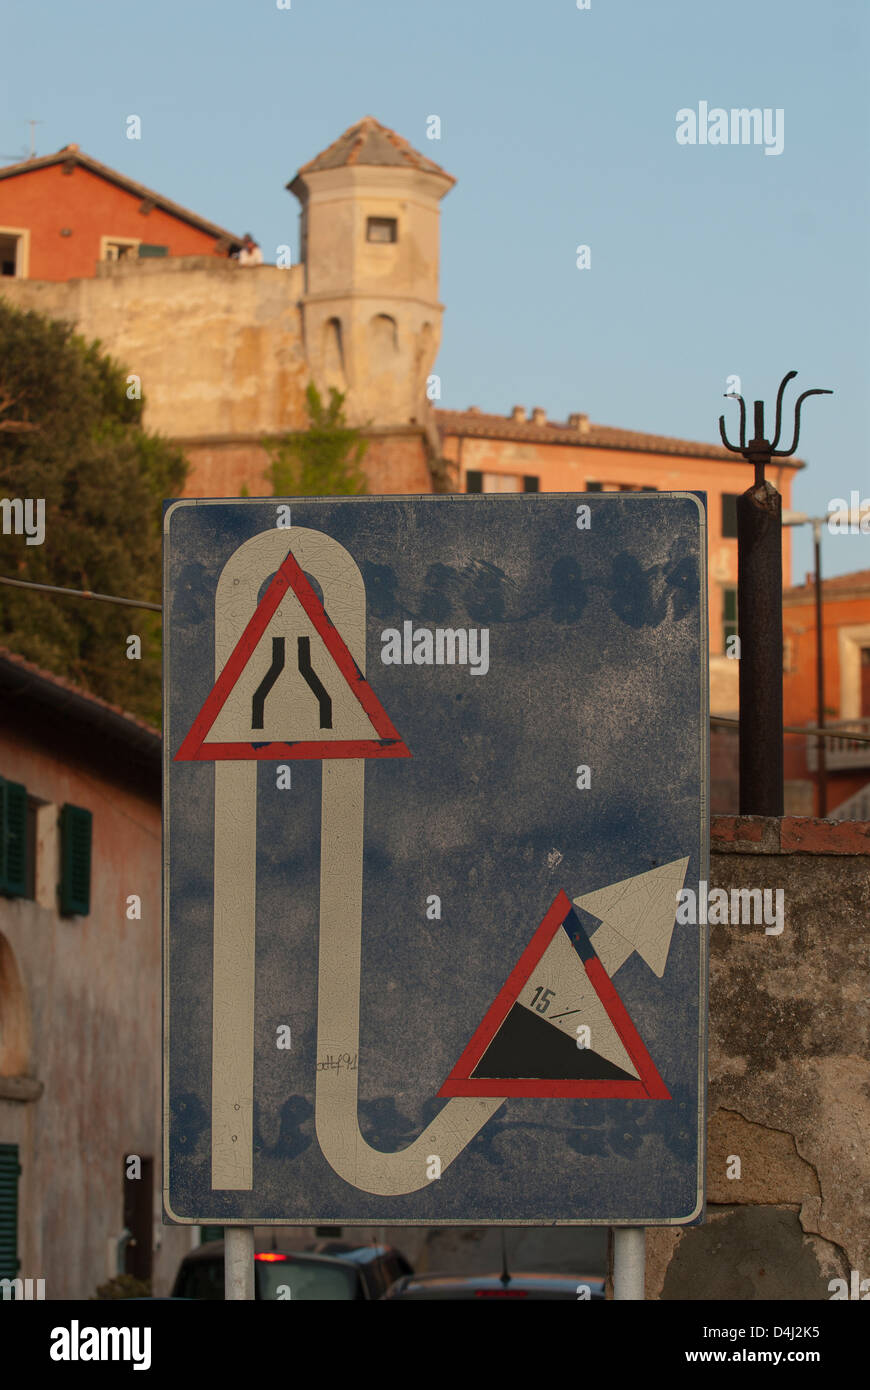 Portoferraio, Italy, a traffic sign indicates the difficult road conditions Stock Photo